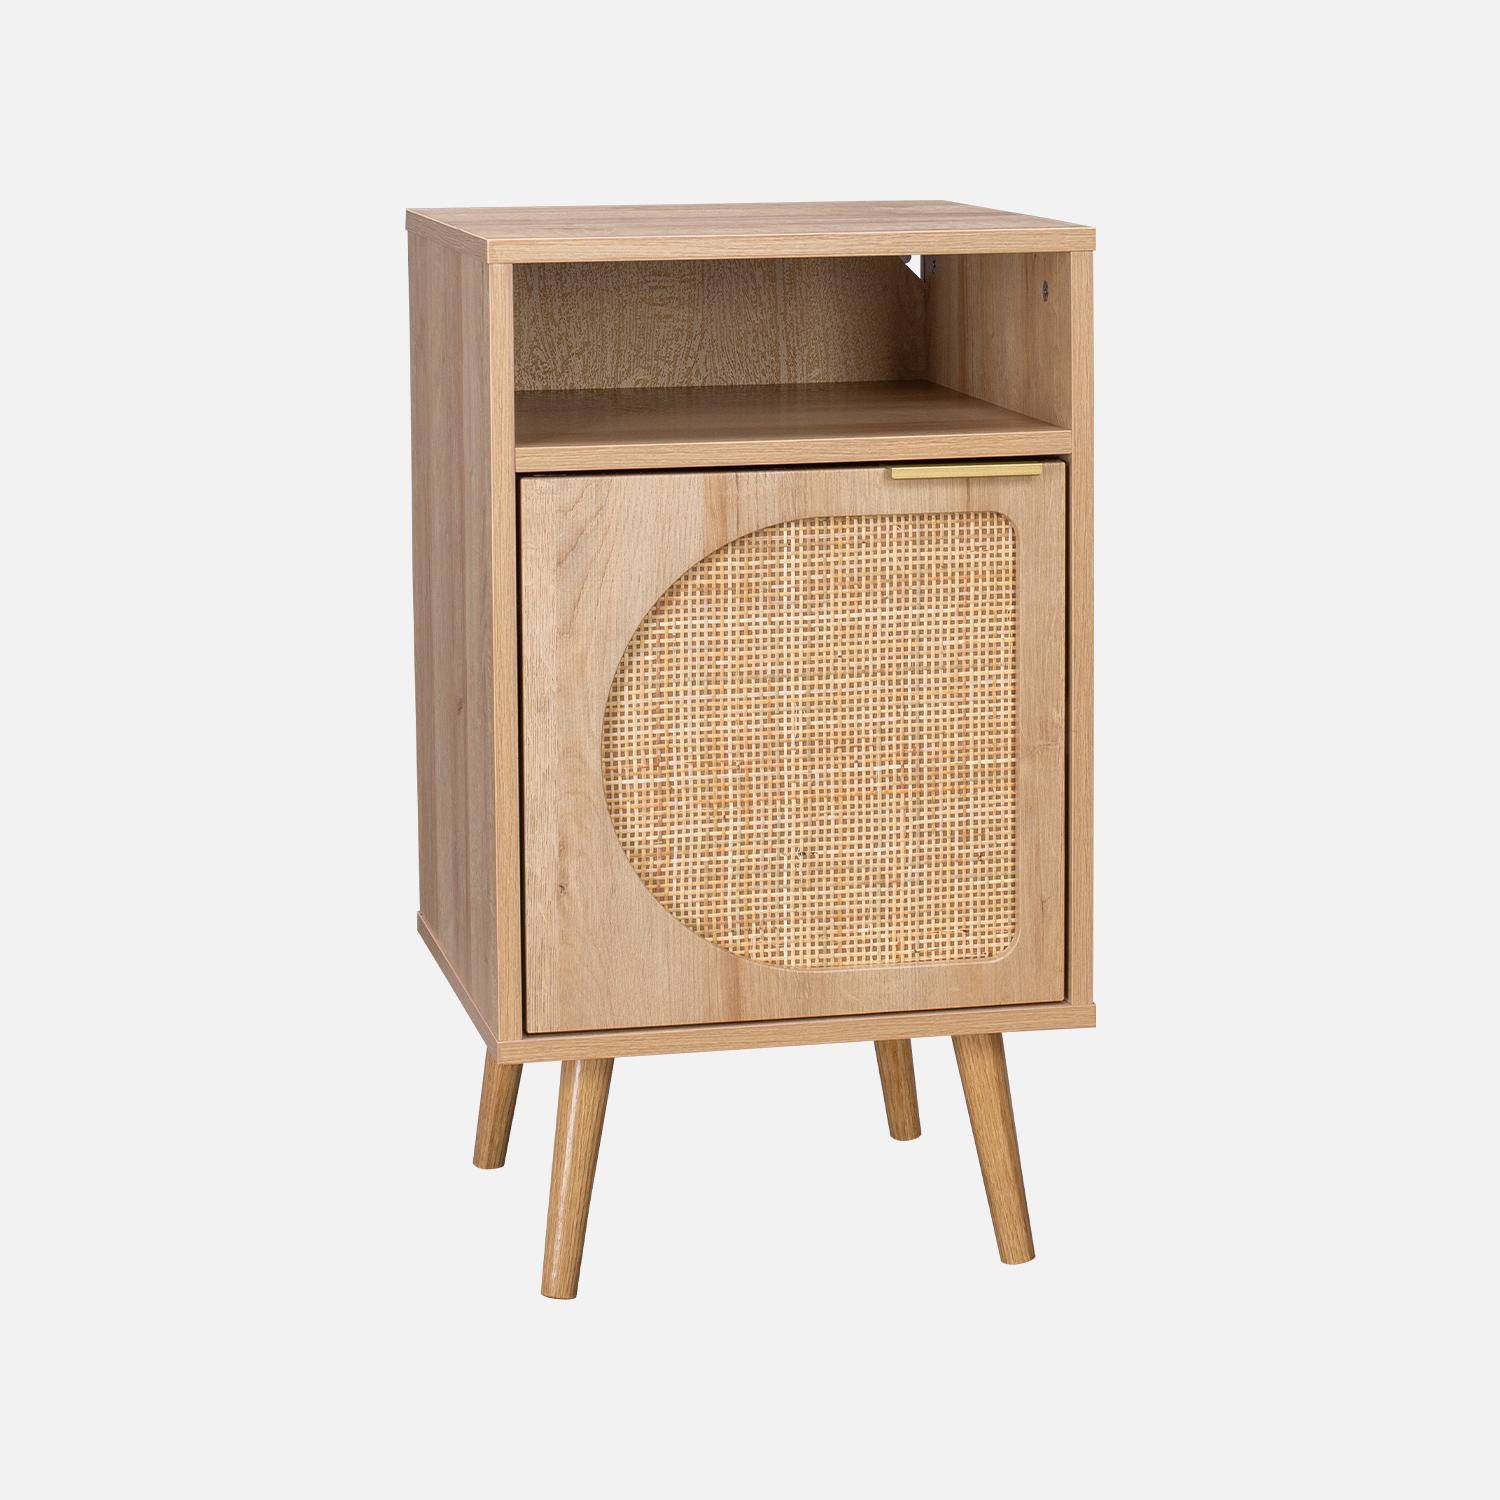 Pair of wood and rounded cane rattan bedside tables, 40x39x65.8cm, Eva, 1 cupboard, 1 storage space each Photo5